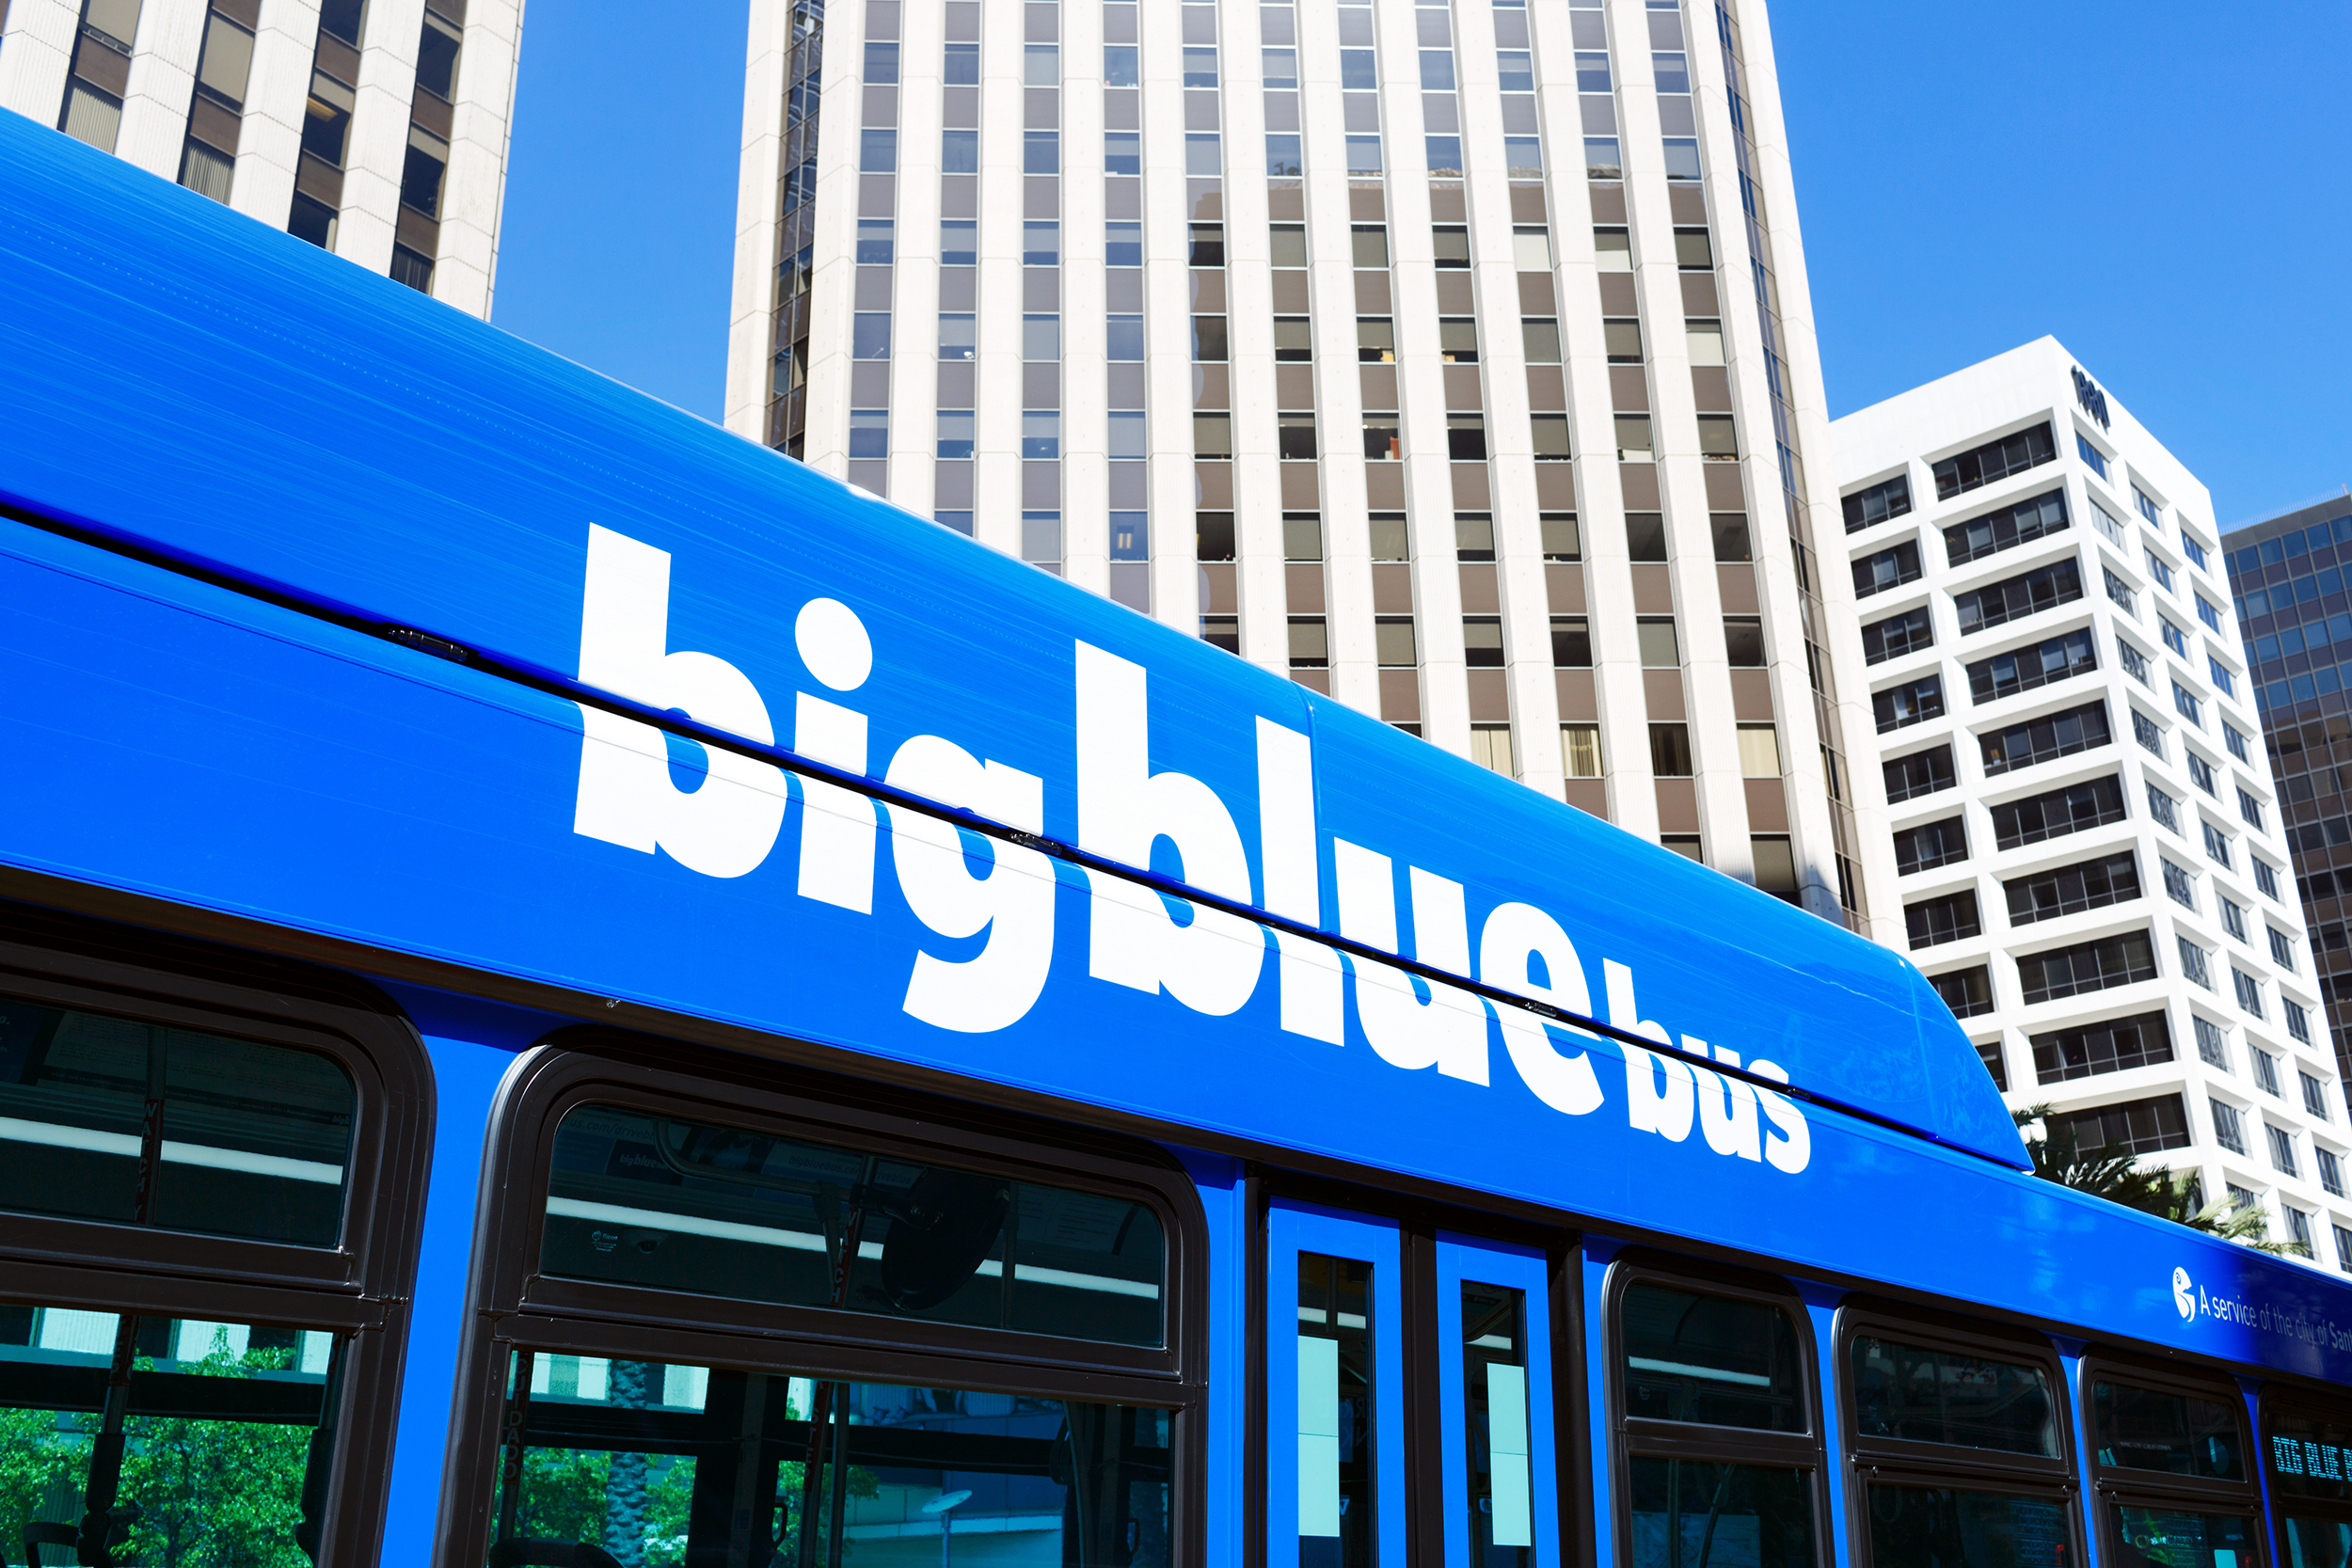 Big Blue Bus reports rise in ridership, plus a new safety officer program